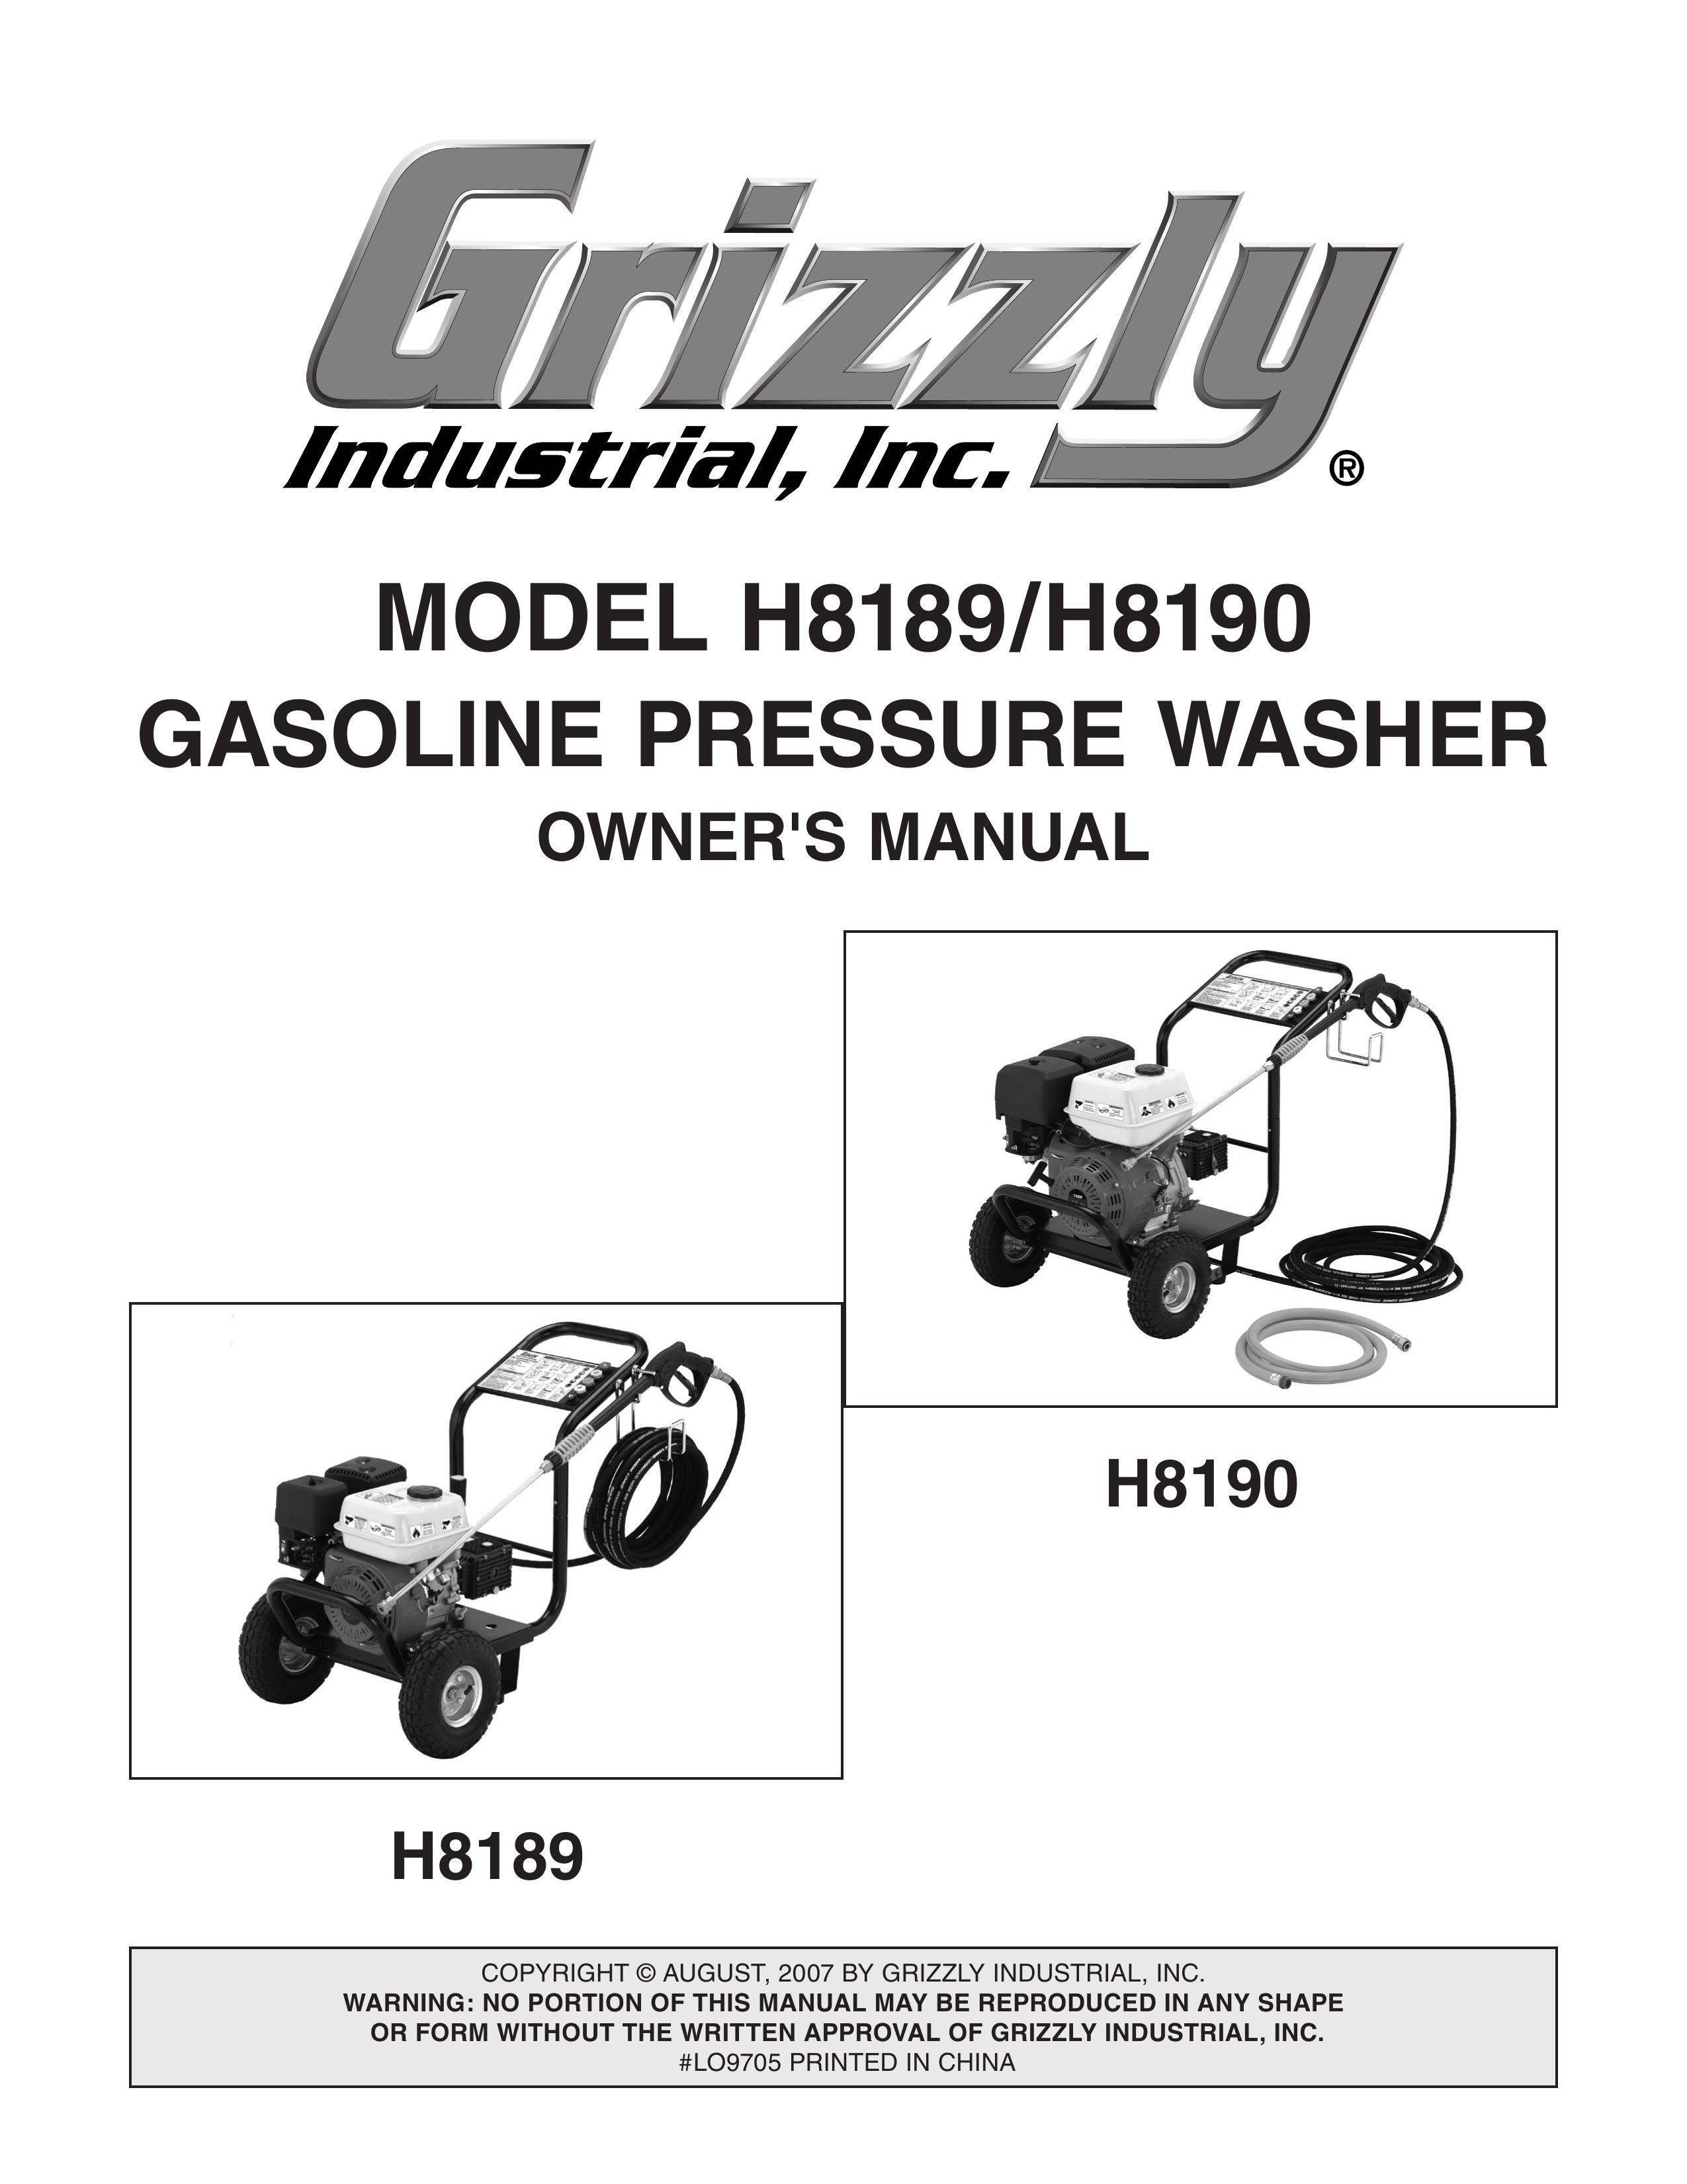 Grizzly H8189/H8190 Pressure Washer User Manual